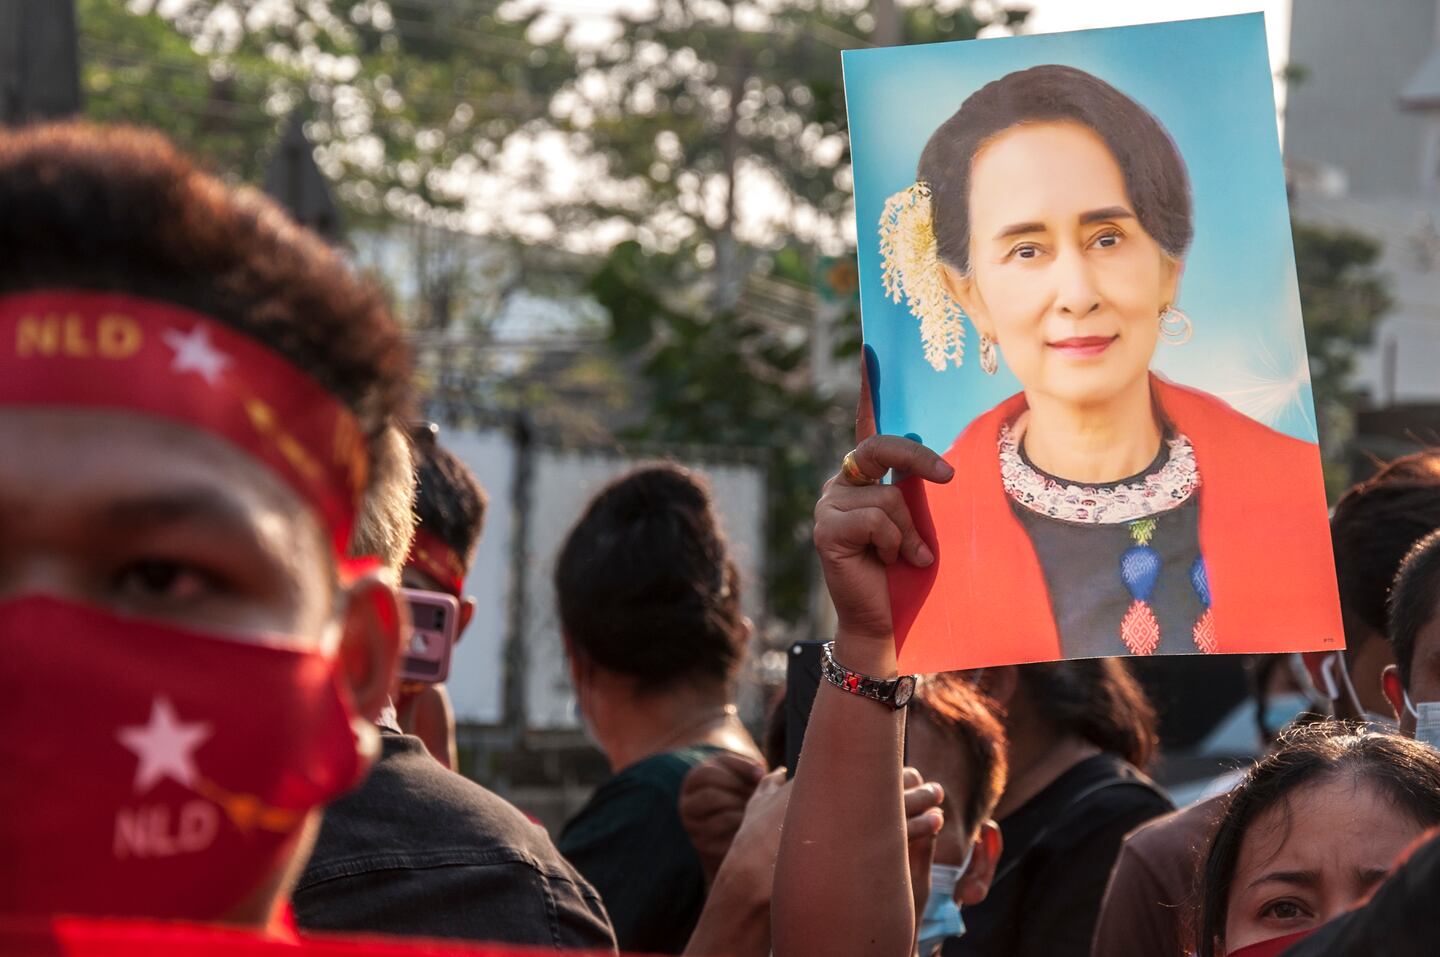 A supporter of Myanmar's National League for Democracy holds a portrait of politician Aung San Suu Kyi during a demonstration. Getty.